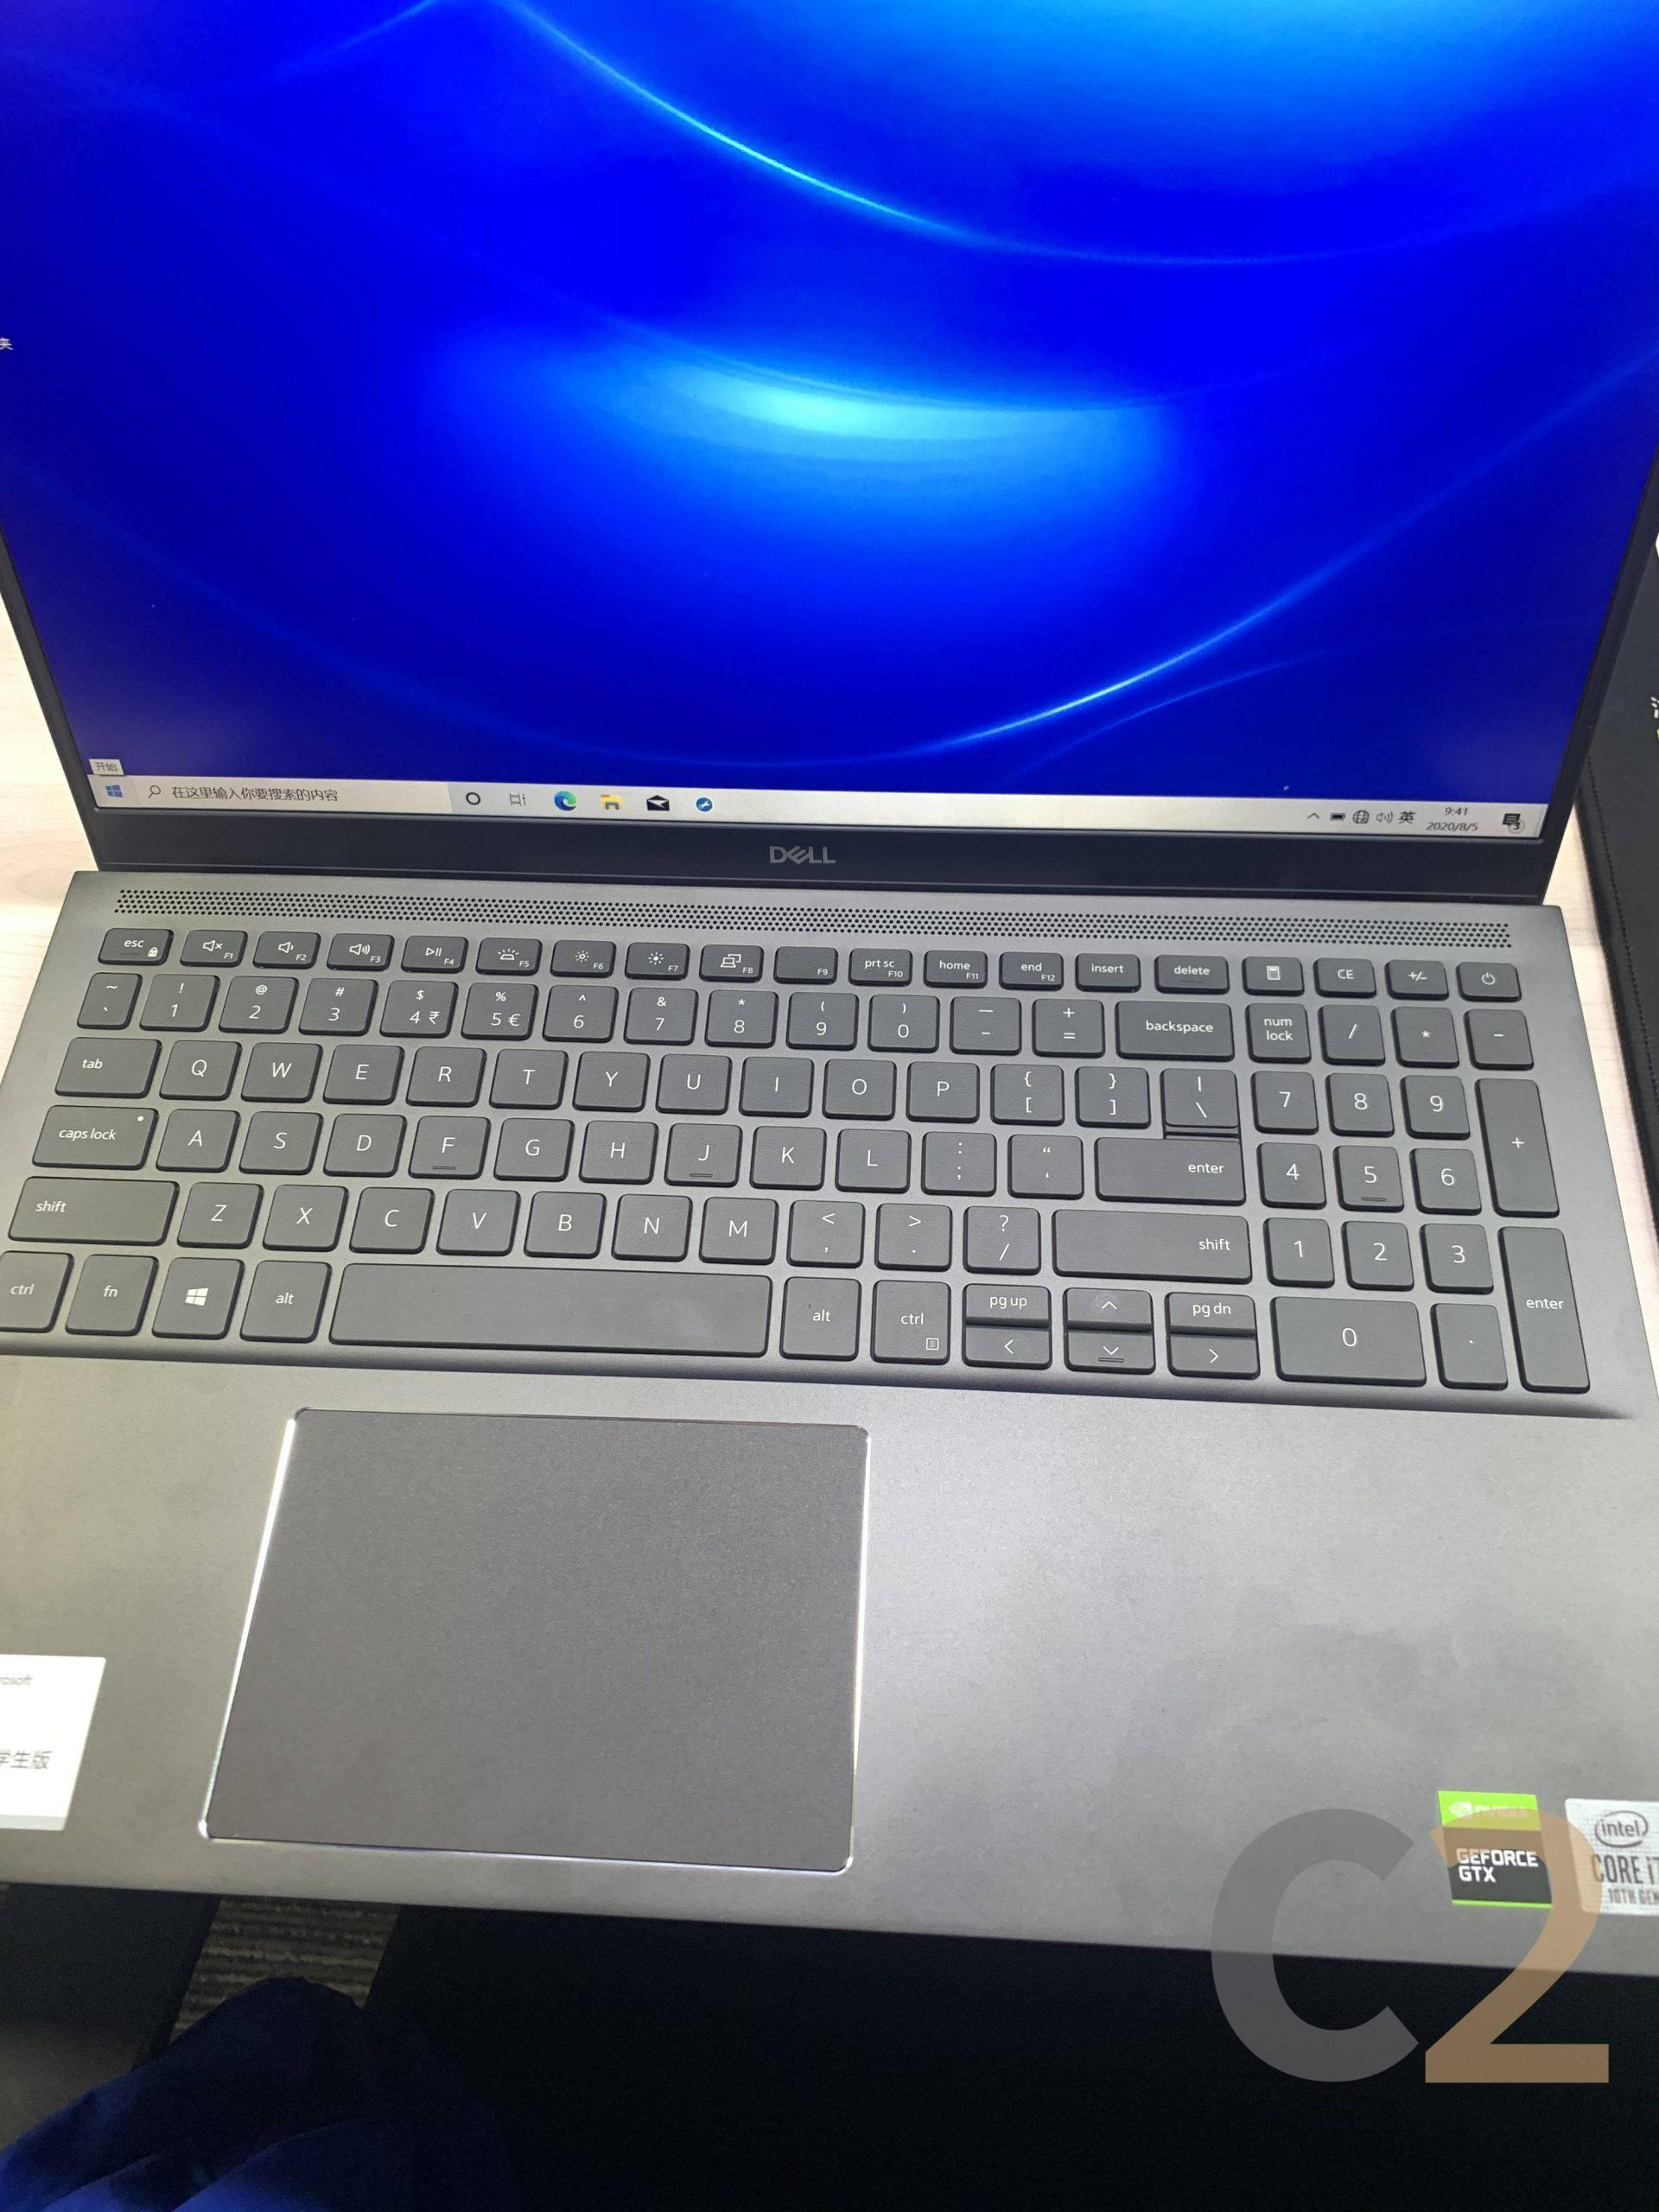 (USED) DELL Vostro 7500 i7-10750H 4G 128-SSD NA GTX 1650 4GB 15.6inch 1920x1080 Business Laptop 95% - C2 Computer